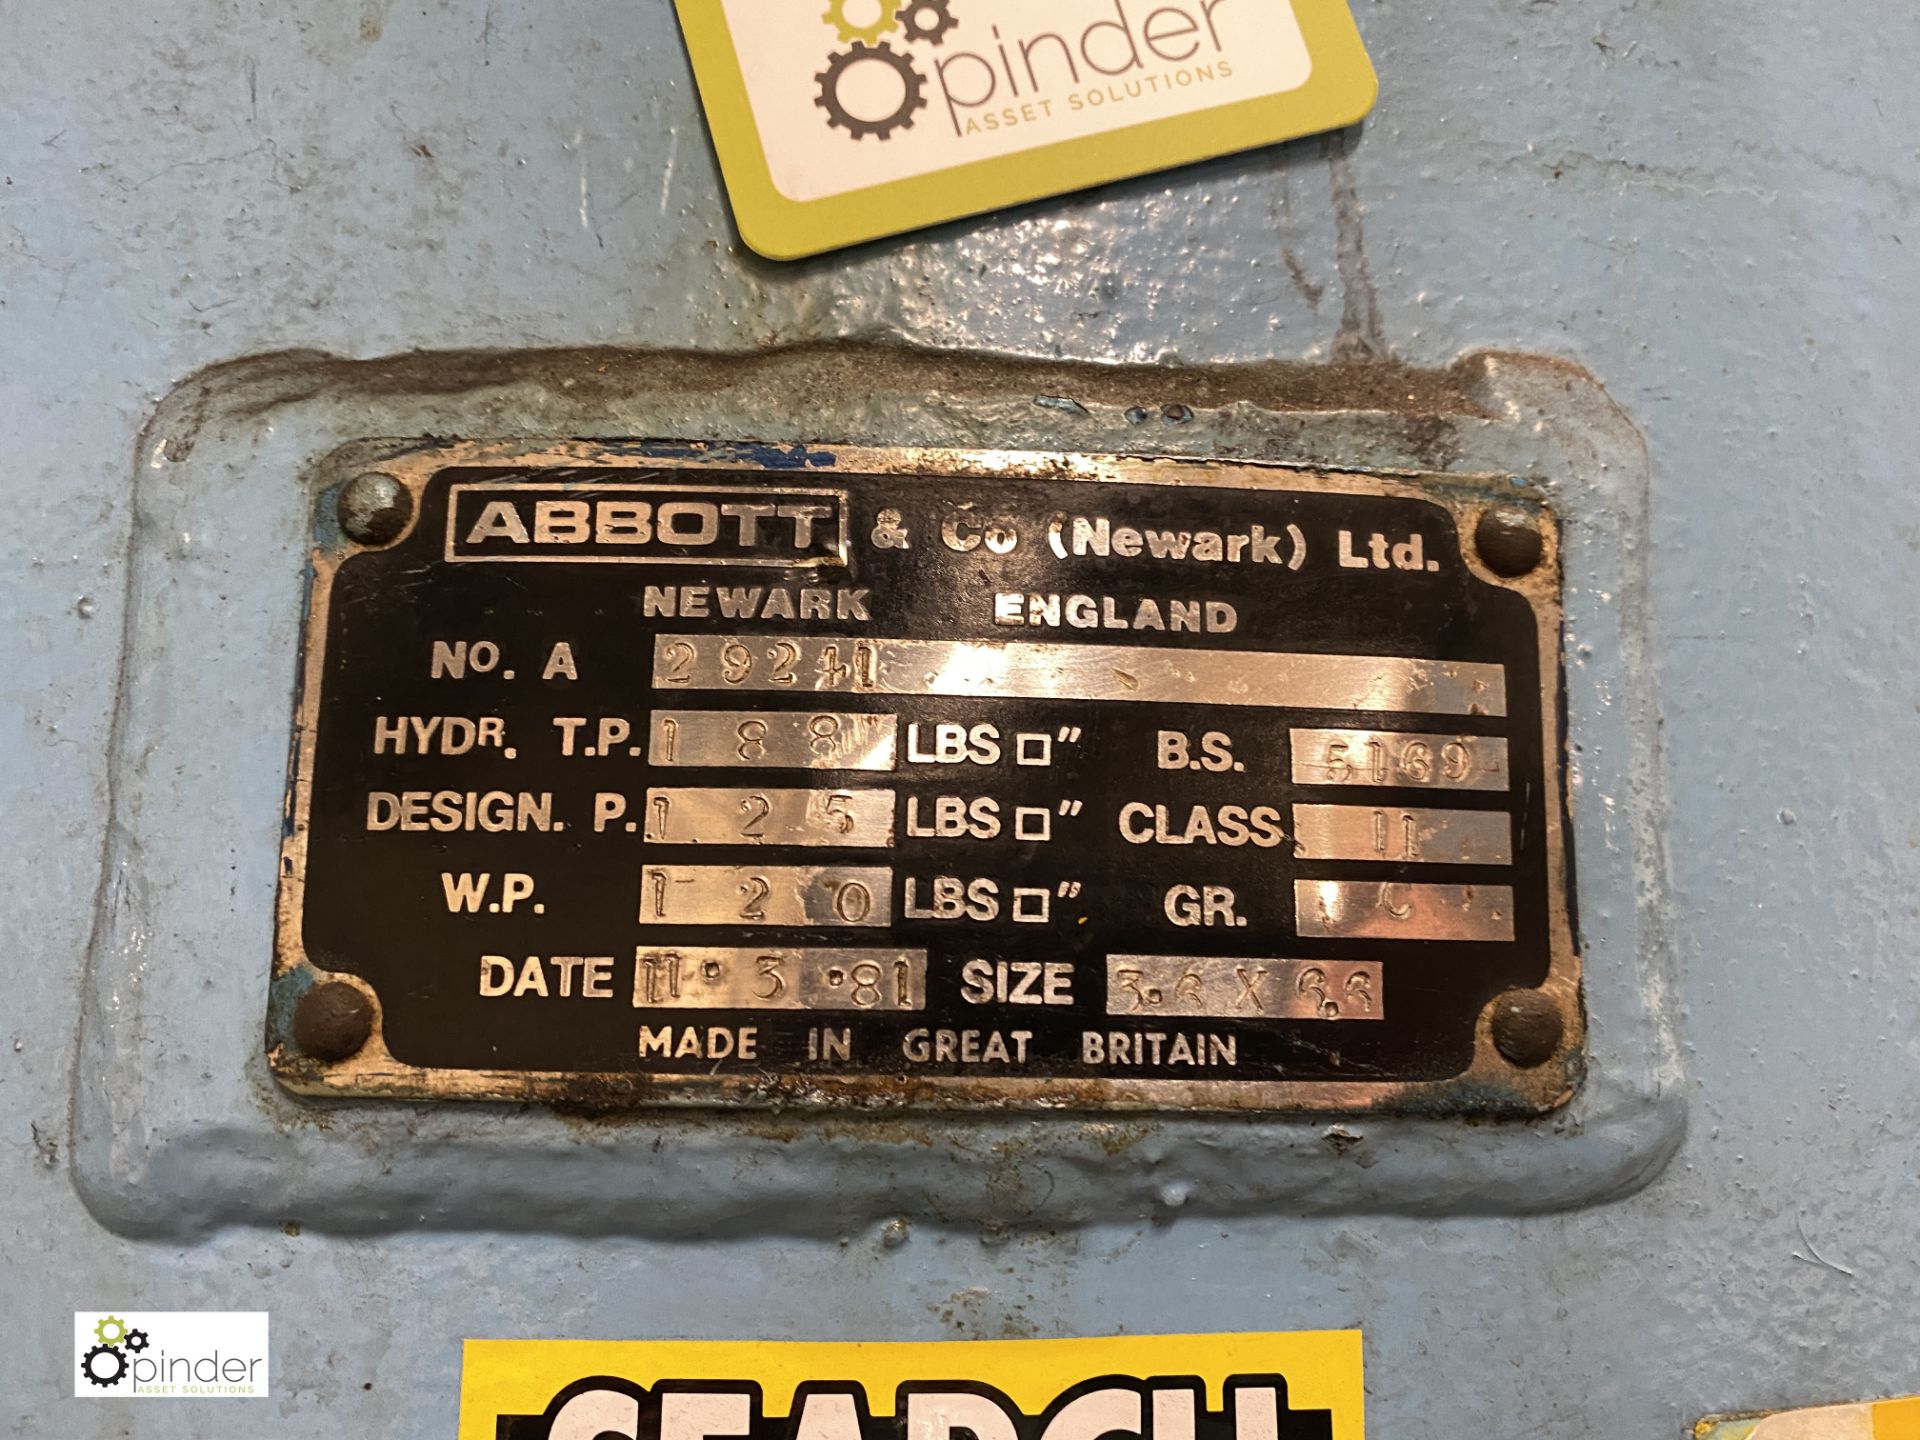 Abbott vertical Air Receiver, serial number A29211 - Image 2 of 3